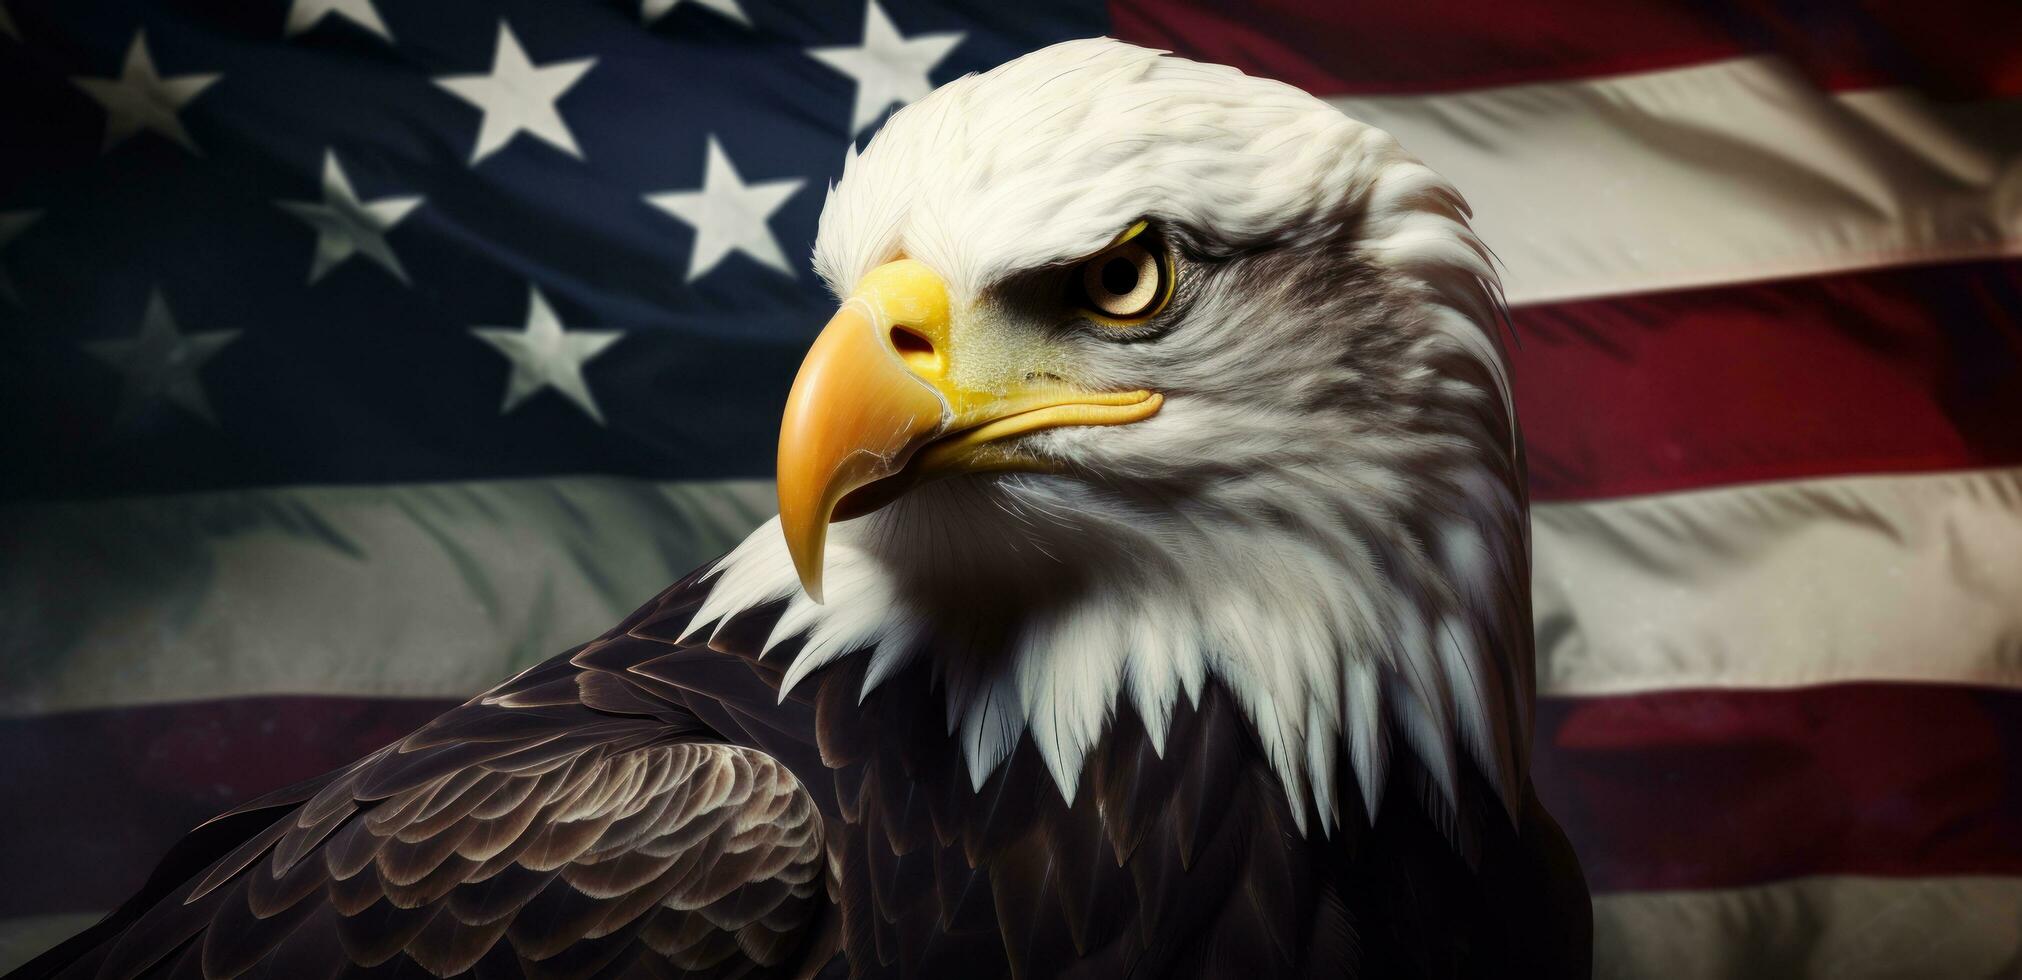 American bald eagle with flag patriotic holiday sentimental background eagle photo